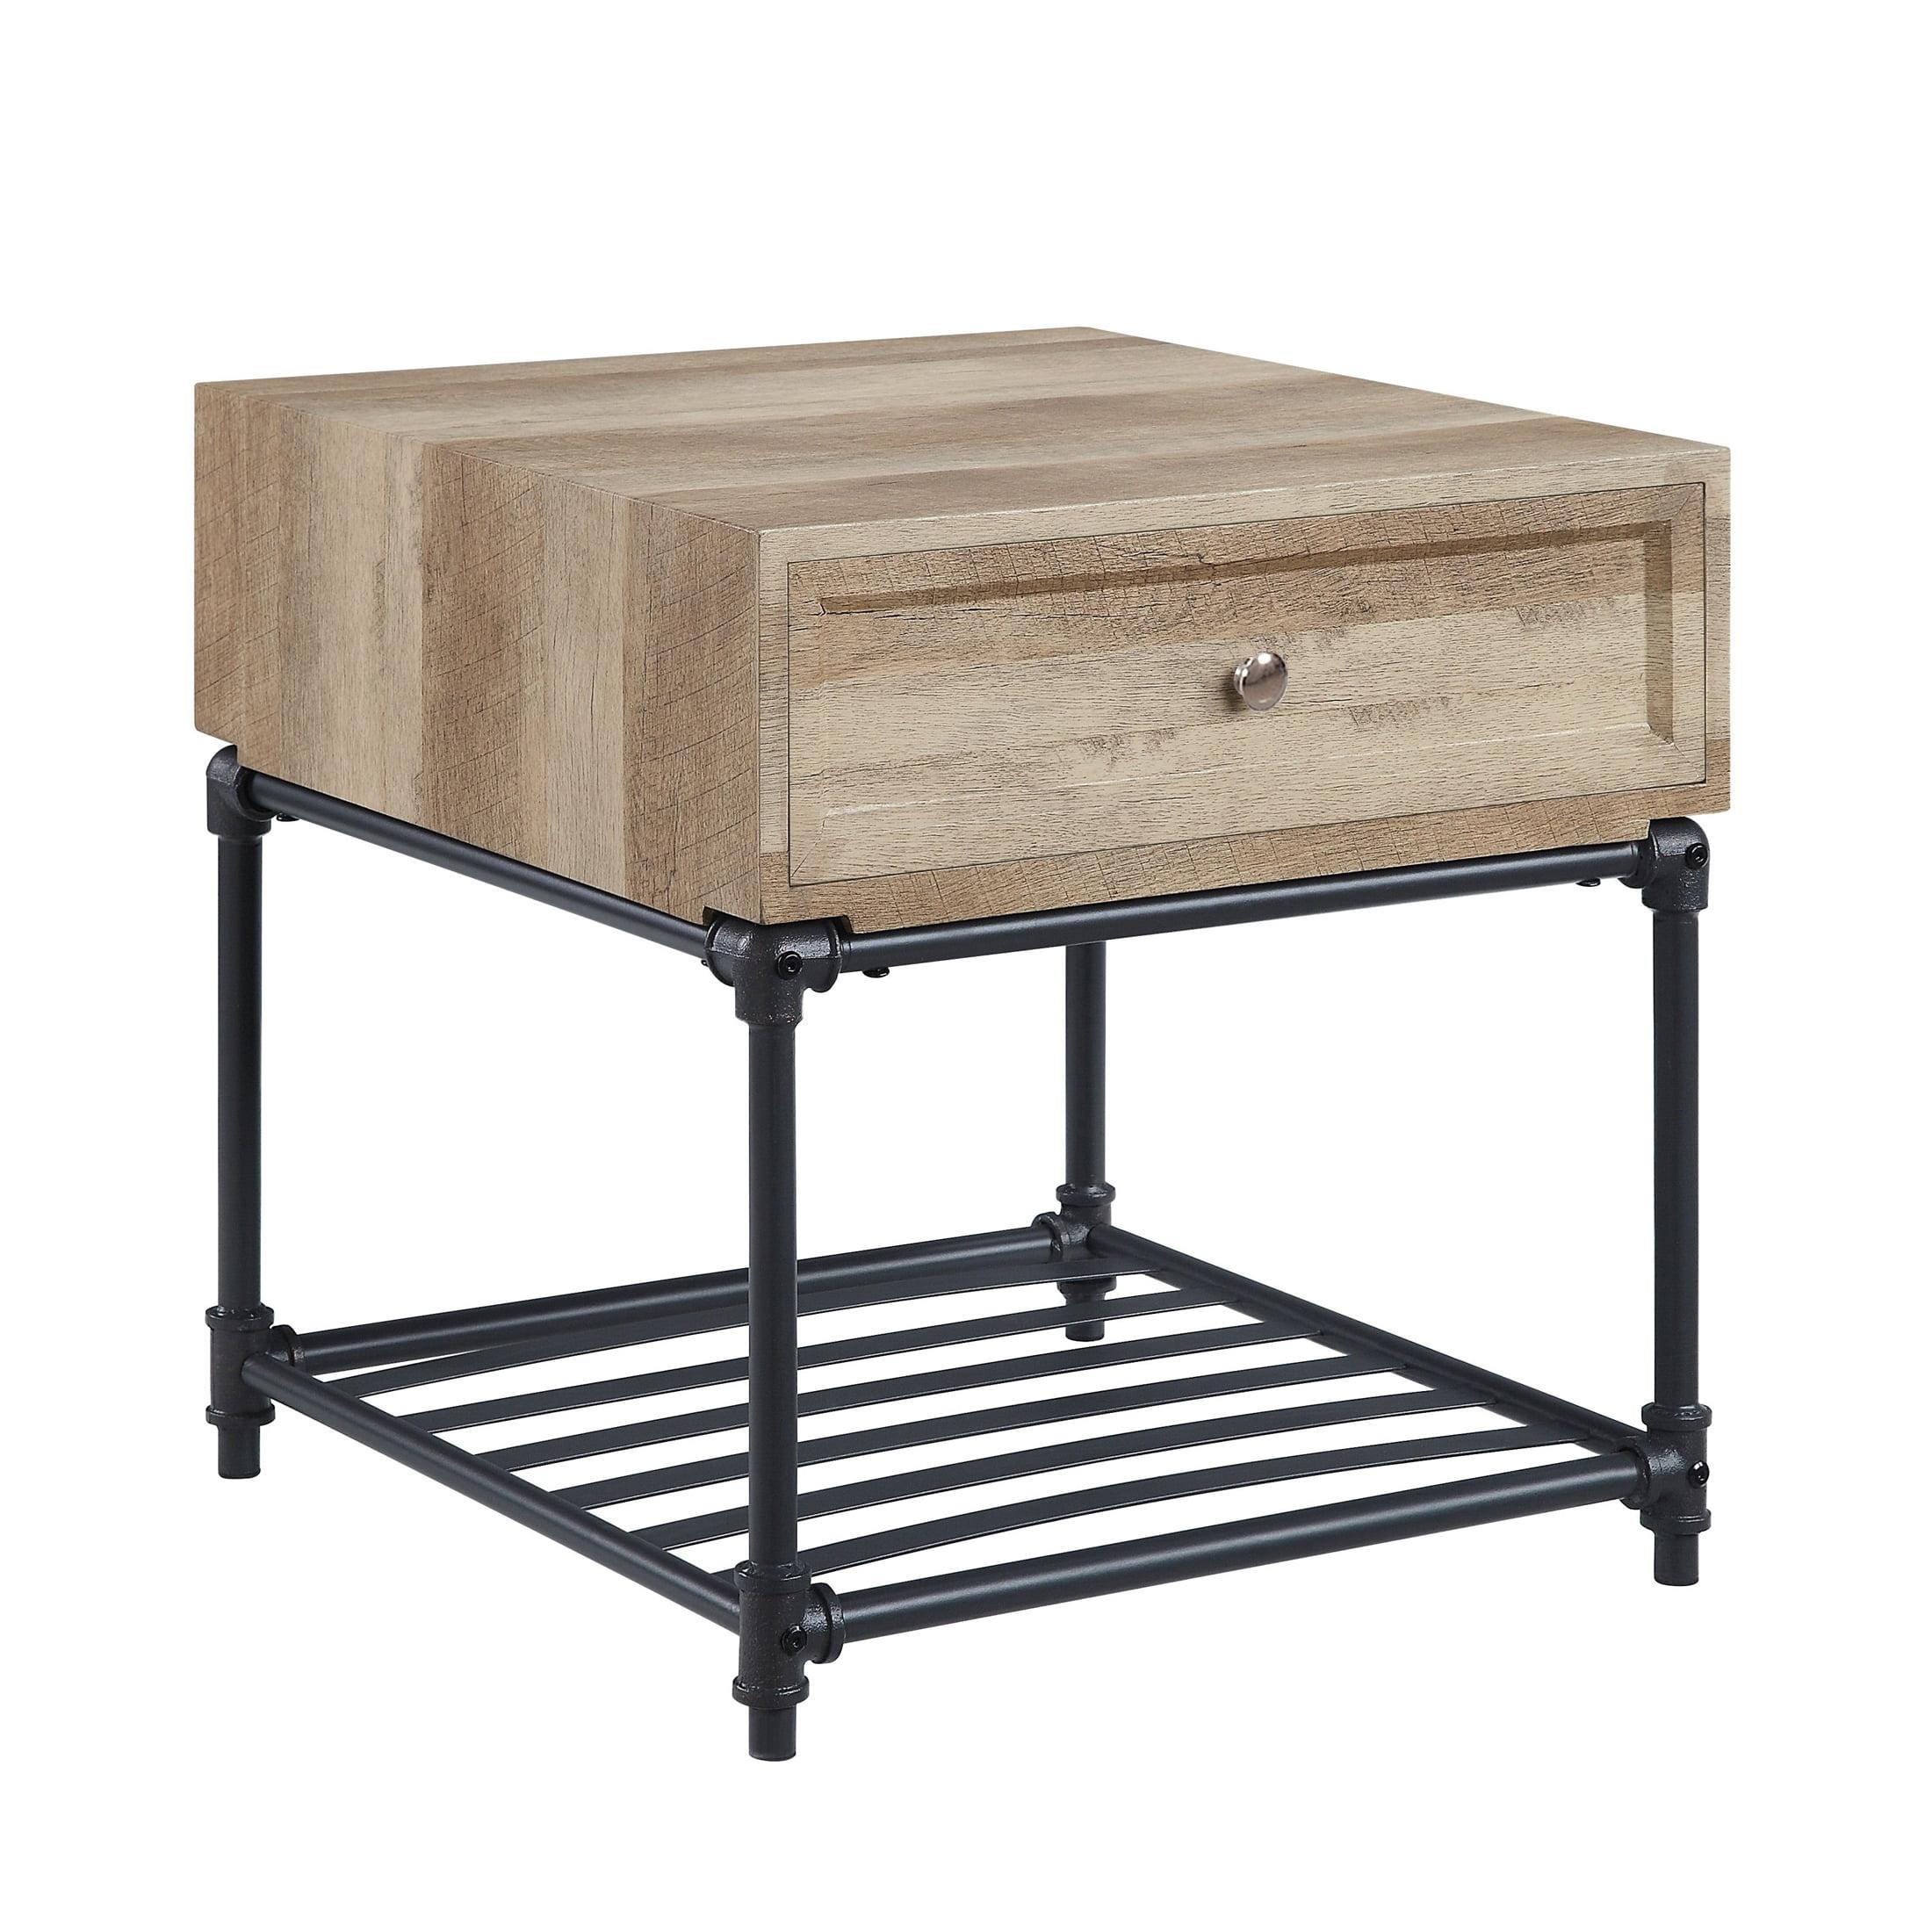 Brantley Industrial Oak and Sandy Black Square Side Table with Storage